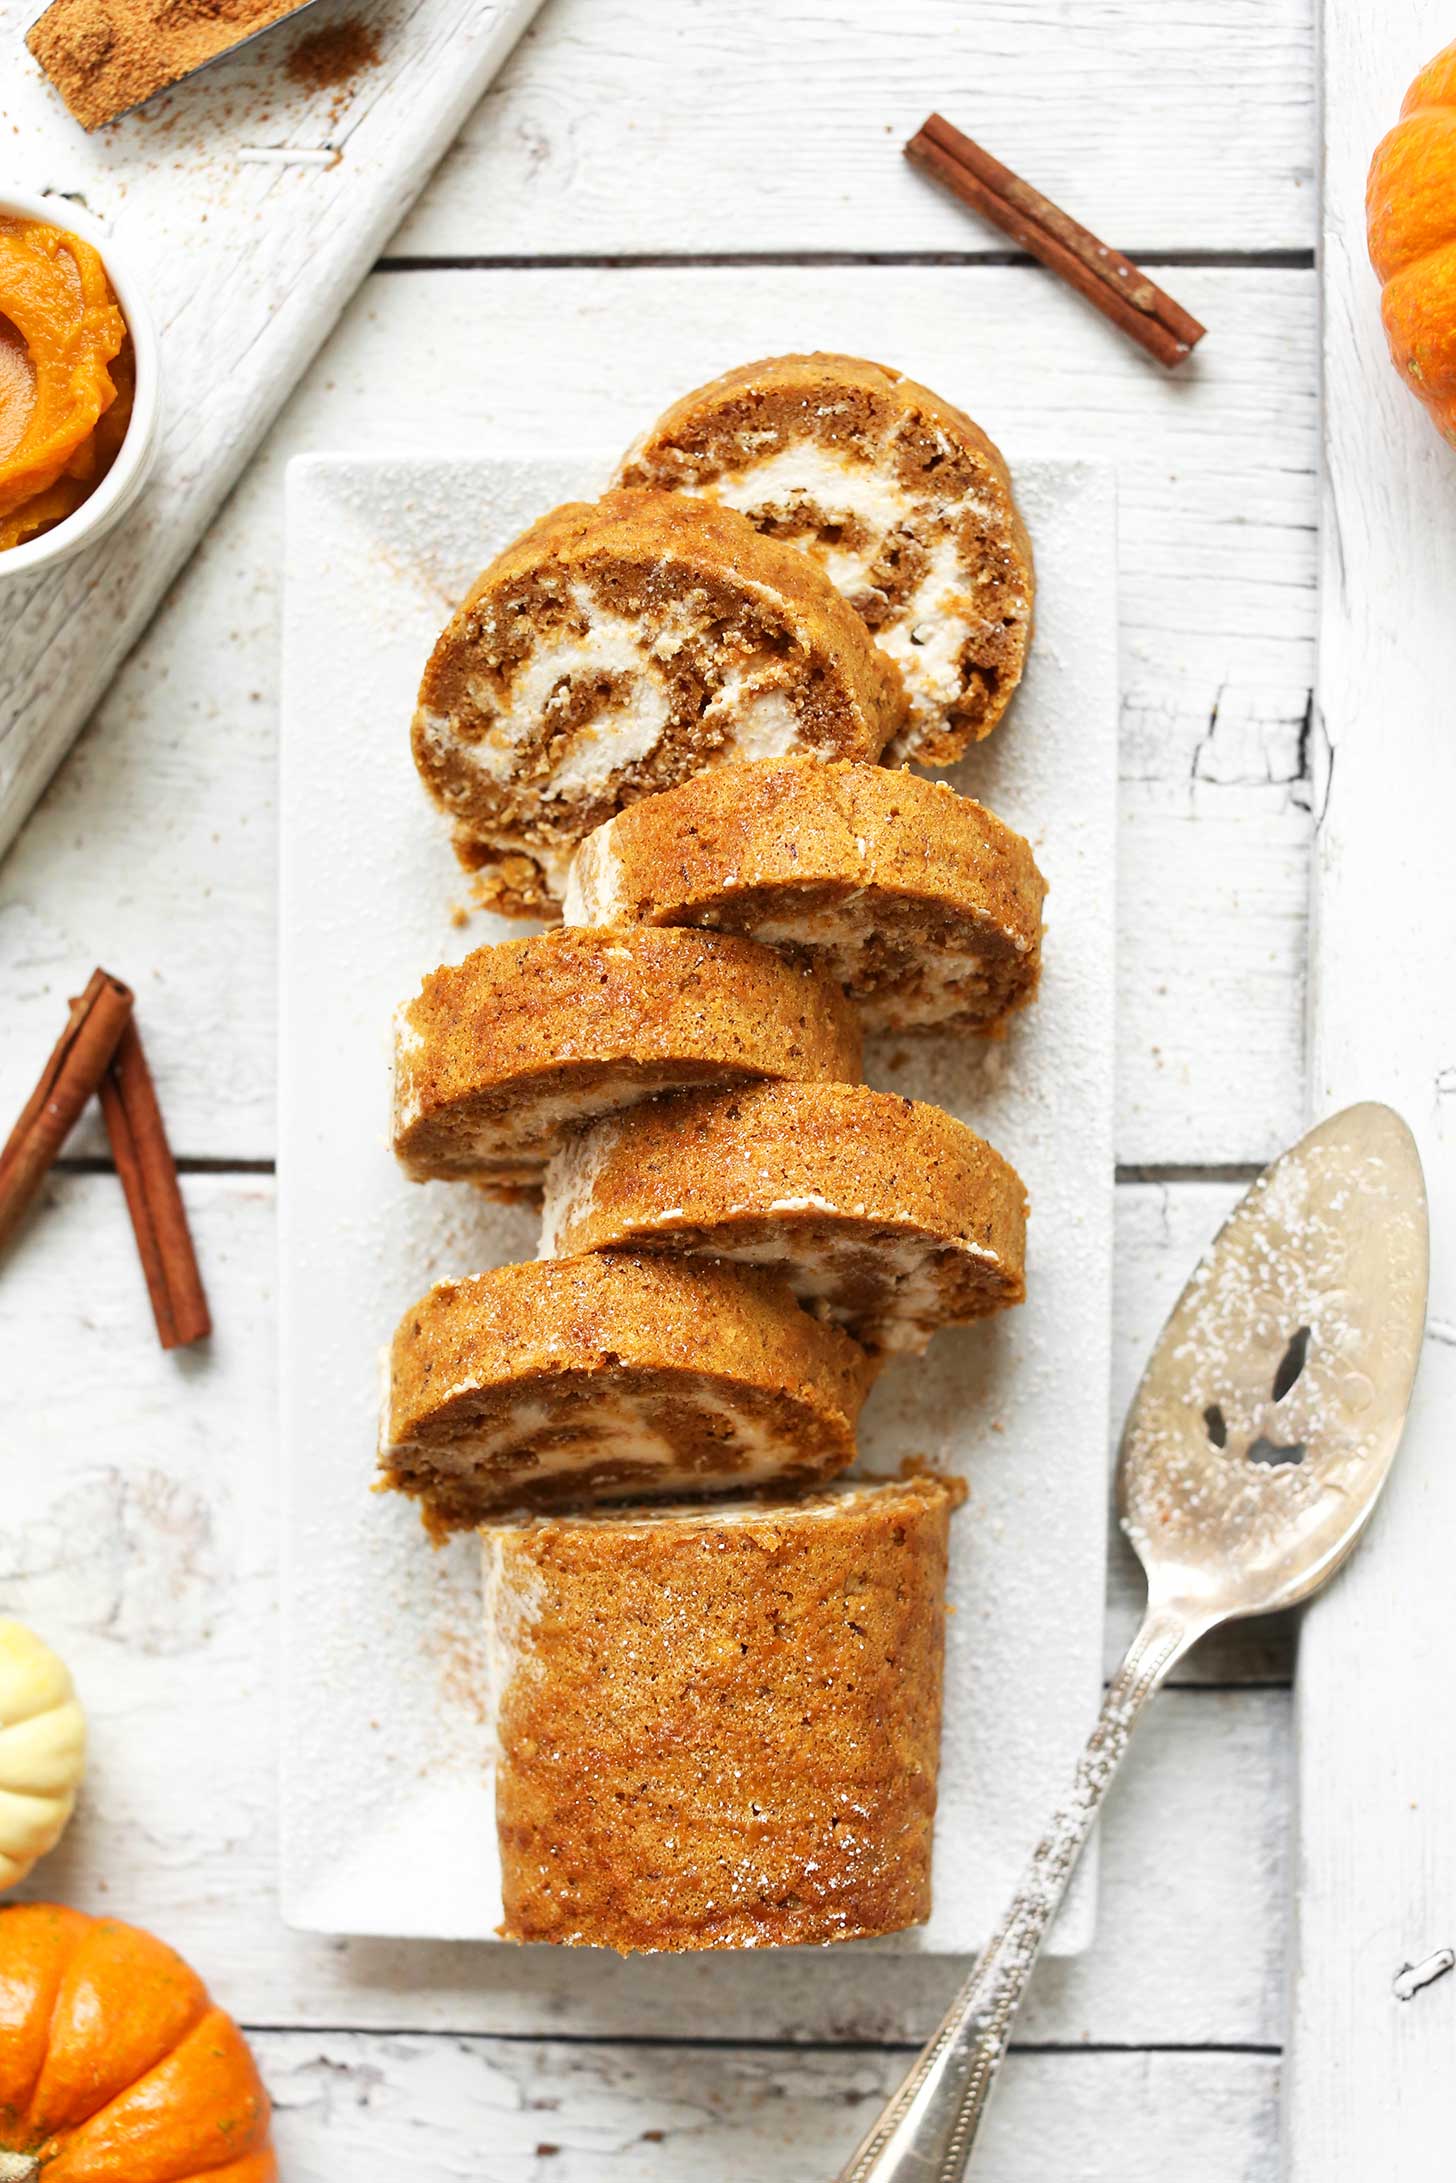 Slices of Vegan Gluten Free Pumpkin Roll on a plate for a delicious dessert recipe